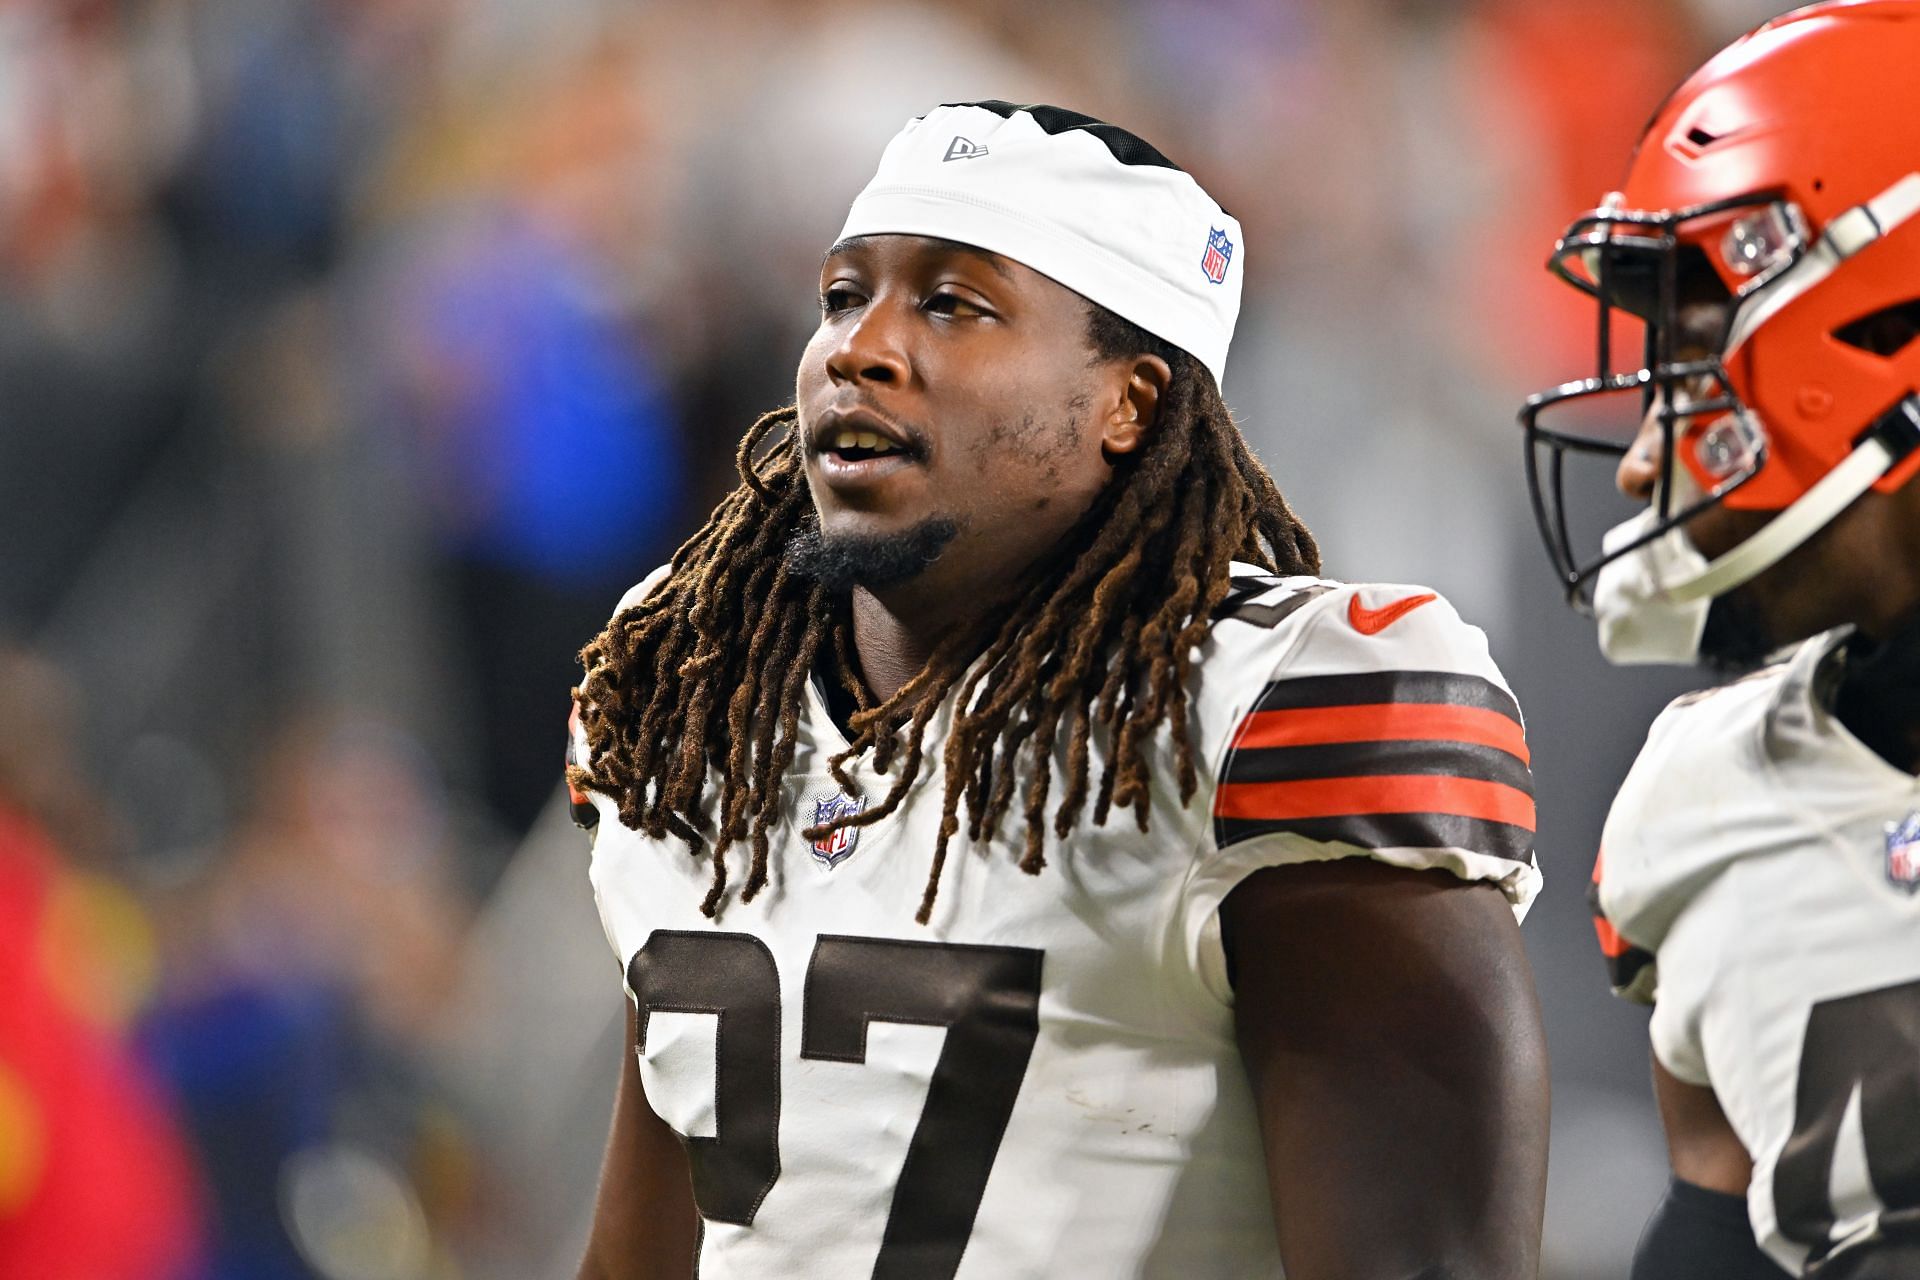 Kareem Hunt largely redeemed himself after joining the Cleveland Browns